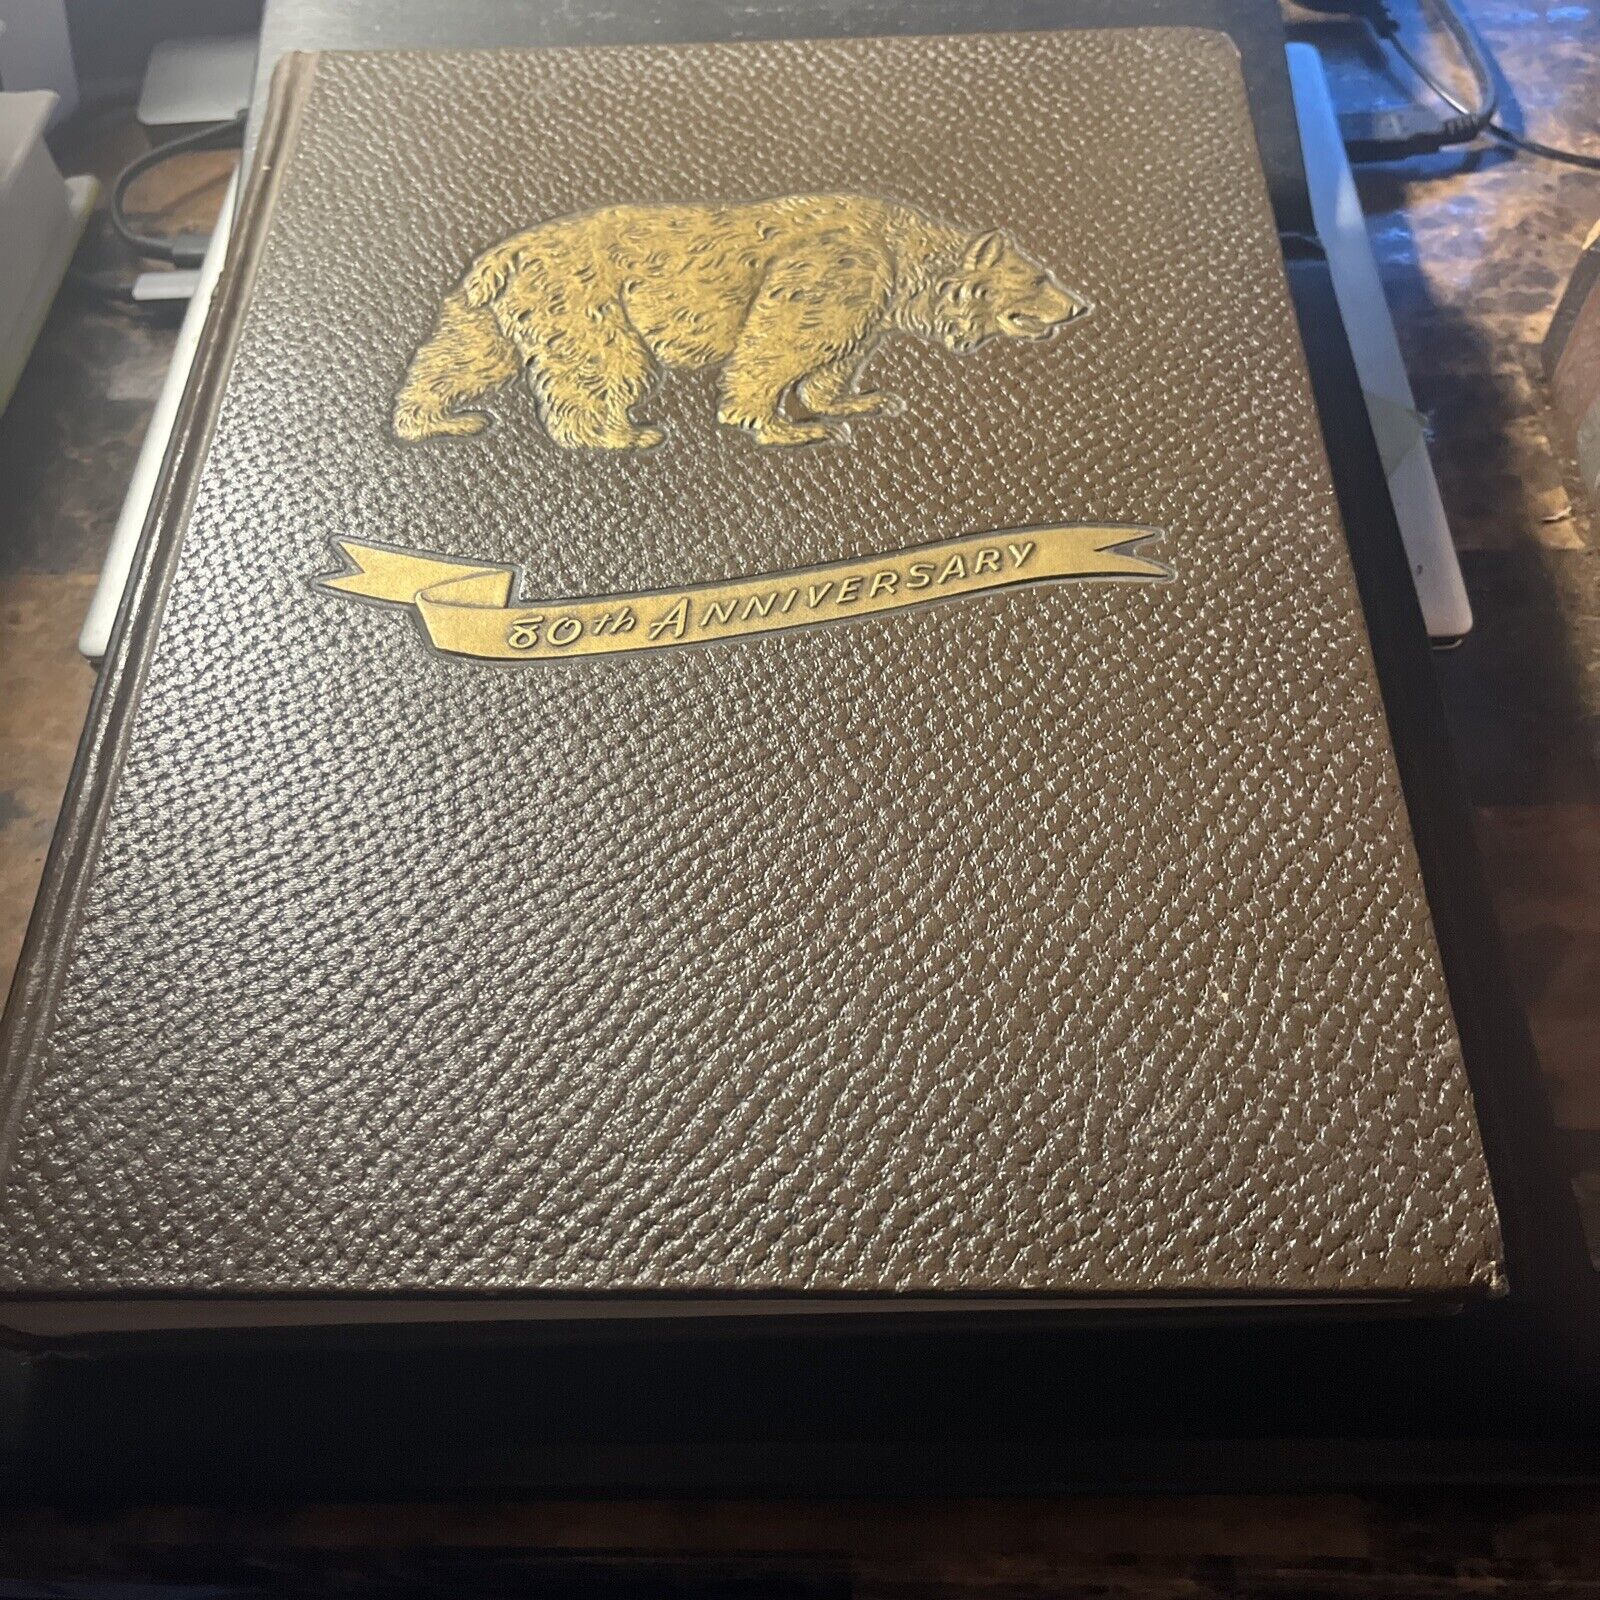 1948 Blue And Gold Volume 75 The 80th Anniversary